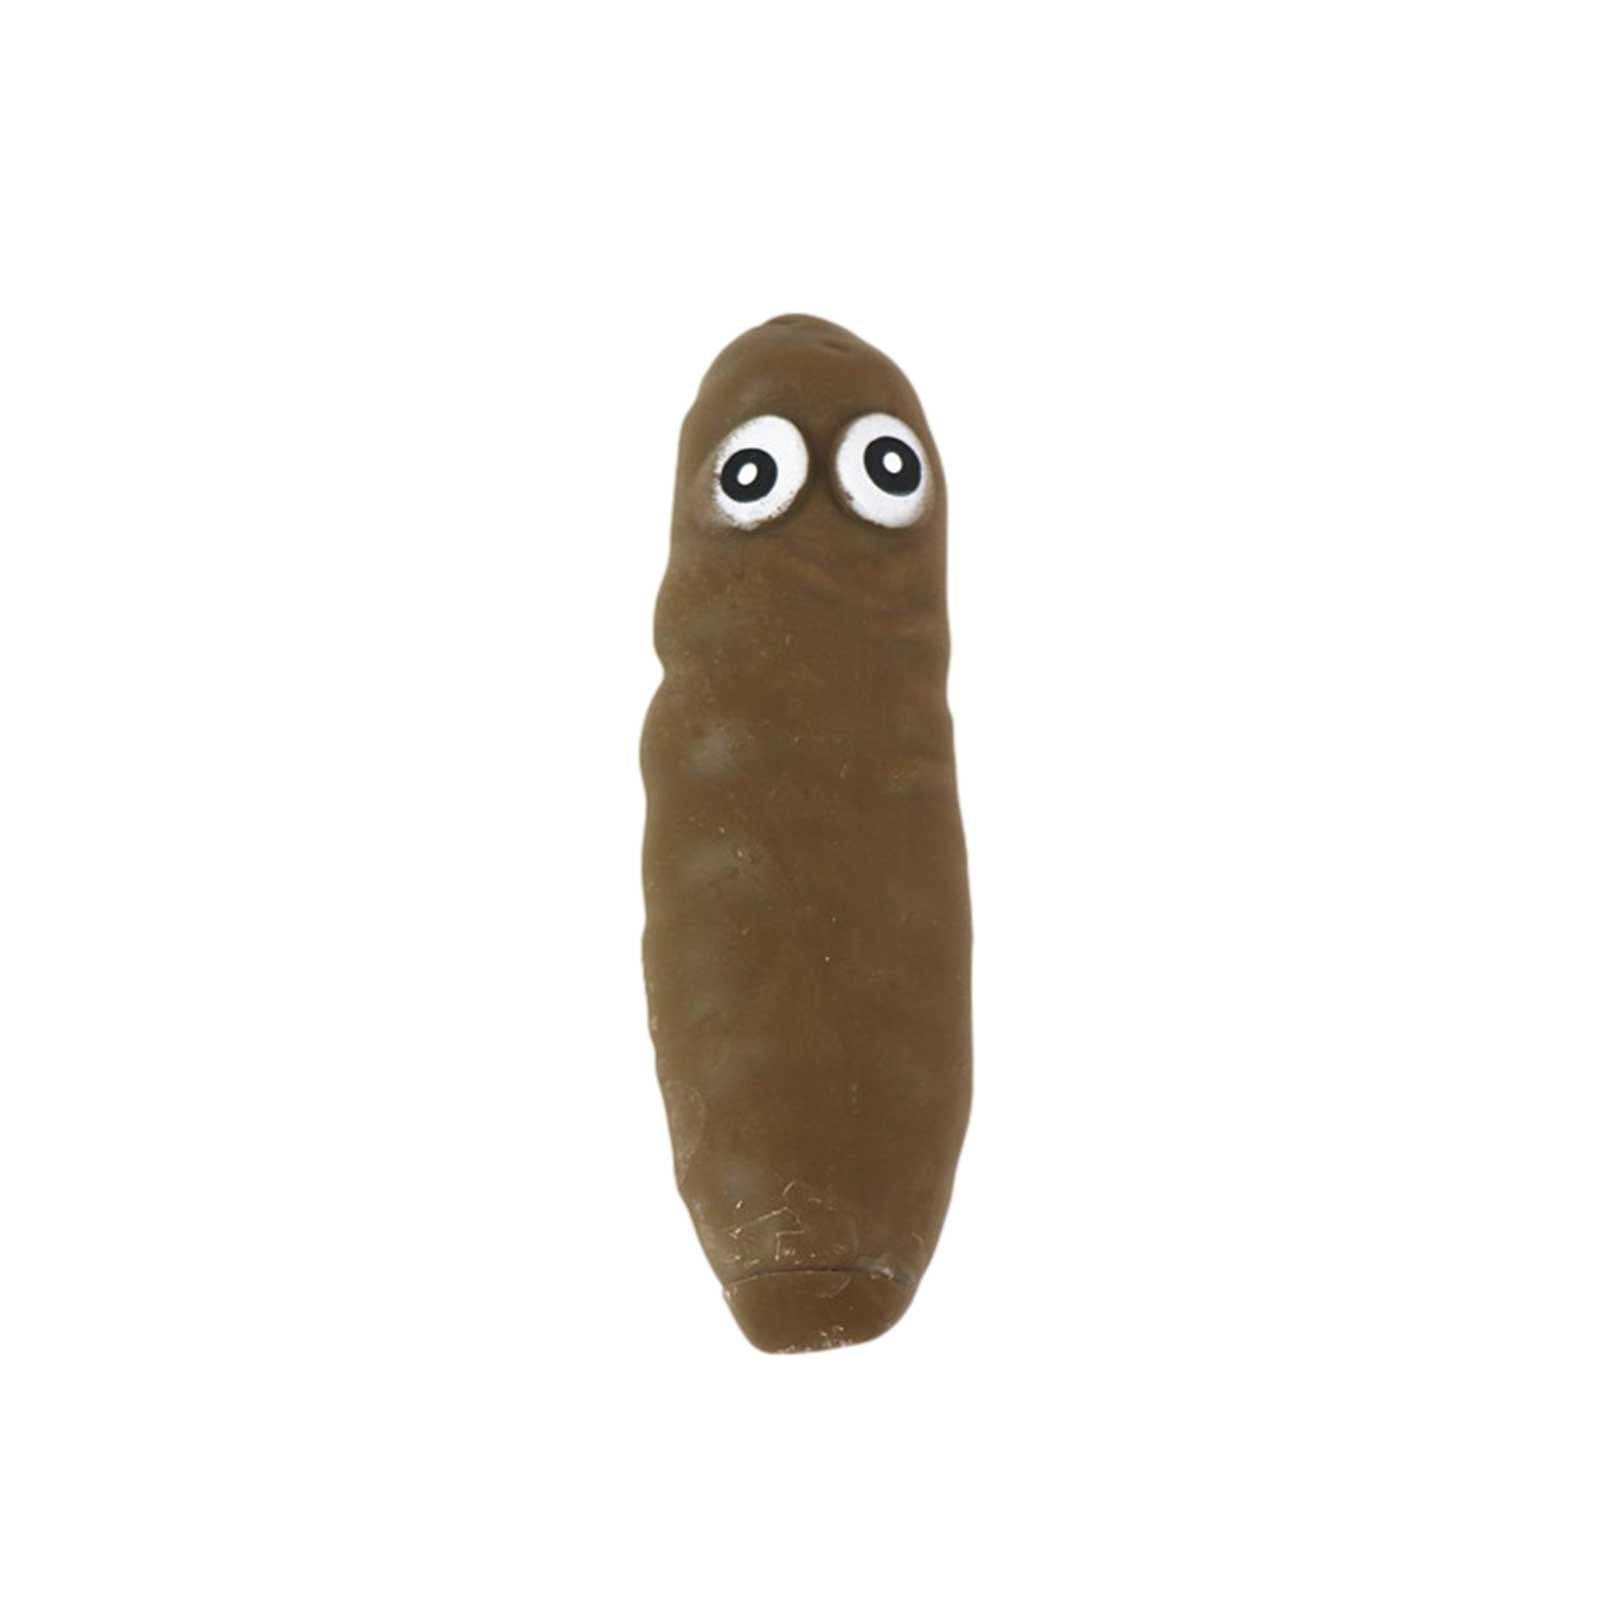 Stretchy Poo Stress Relief Toy Fake Poop